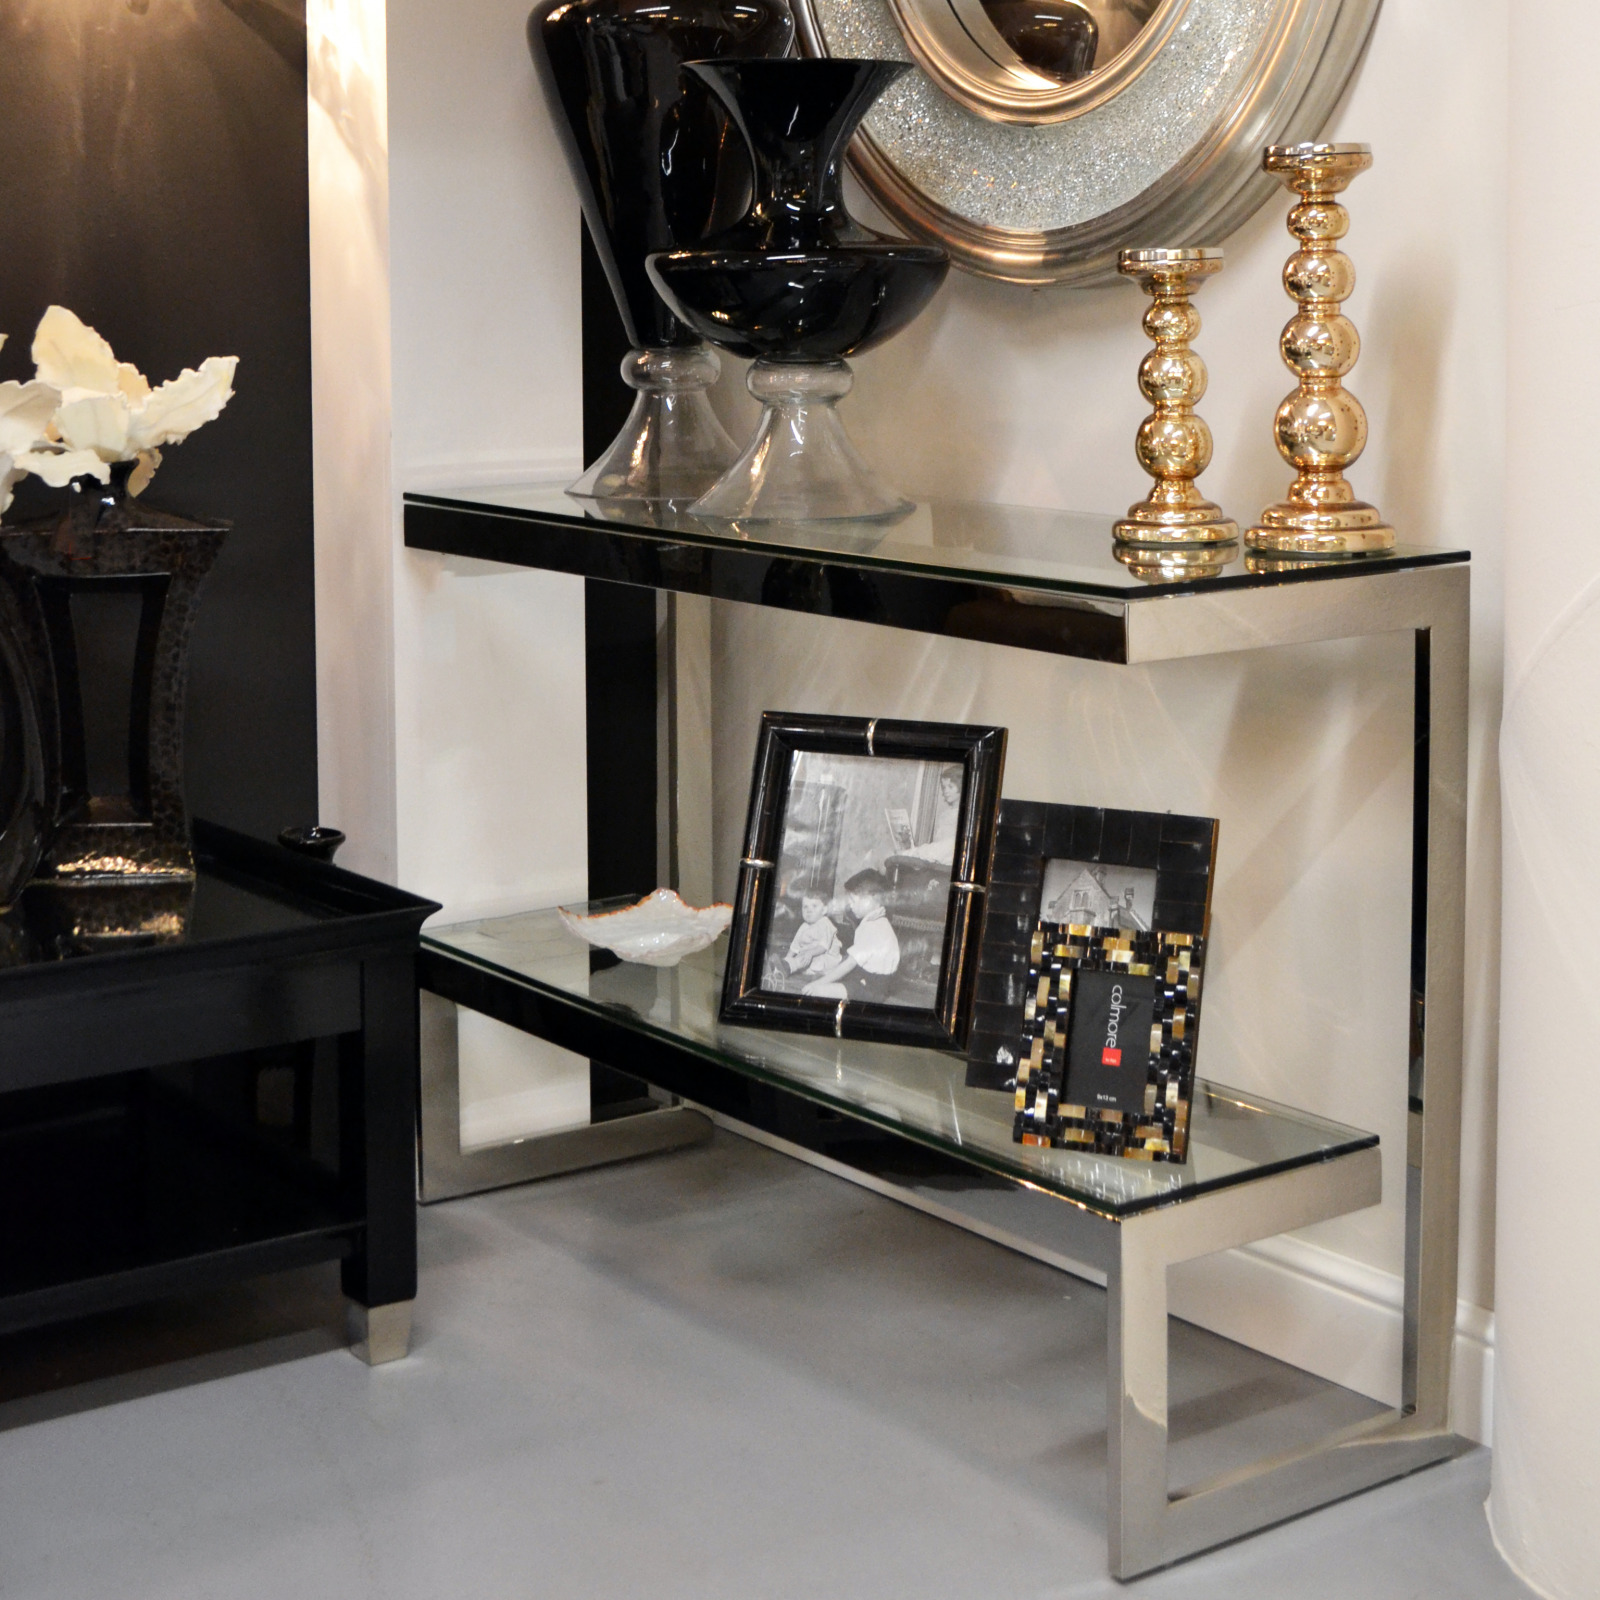 G console table